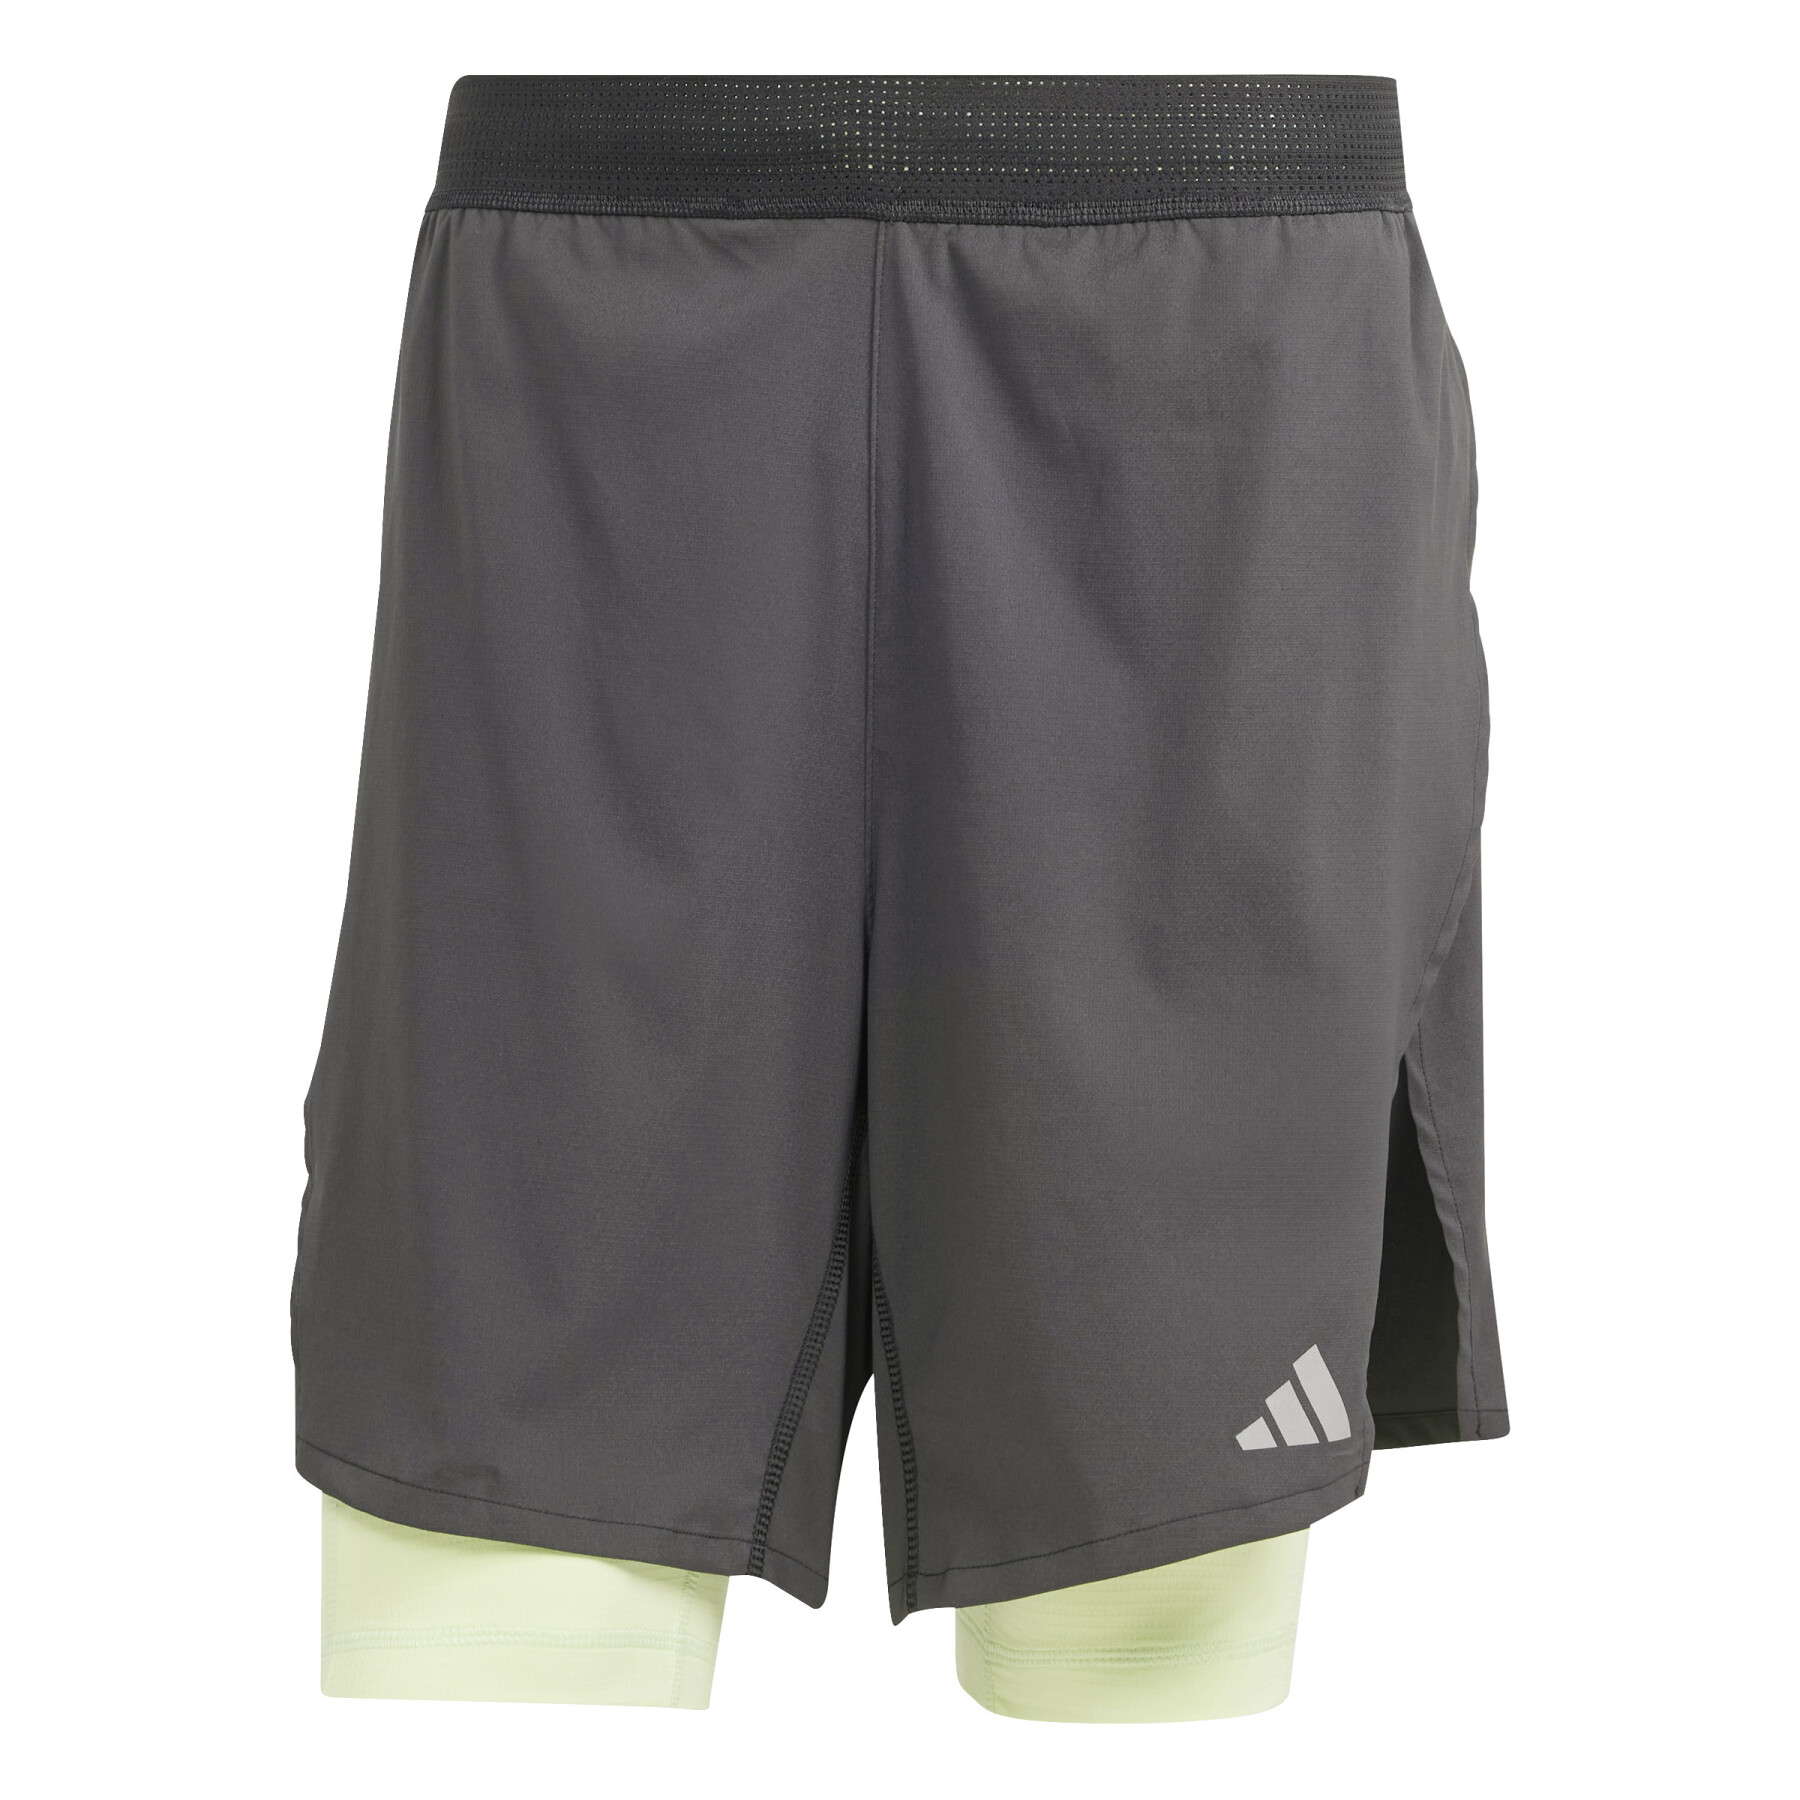 2in1 Shorts adidas Hiit Workout HEAT.RDY